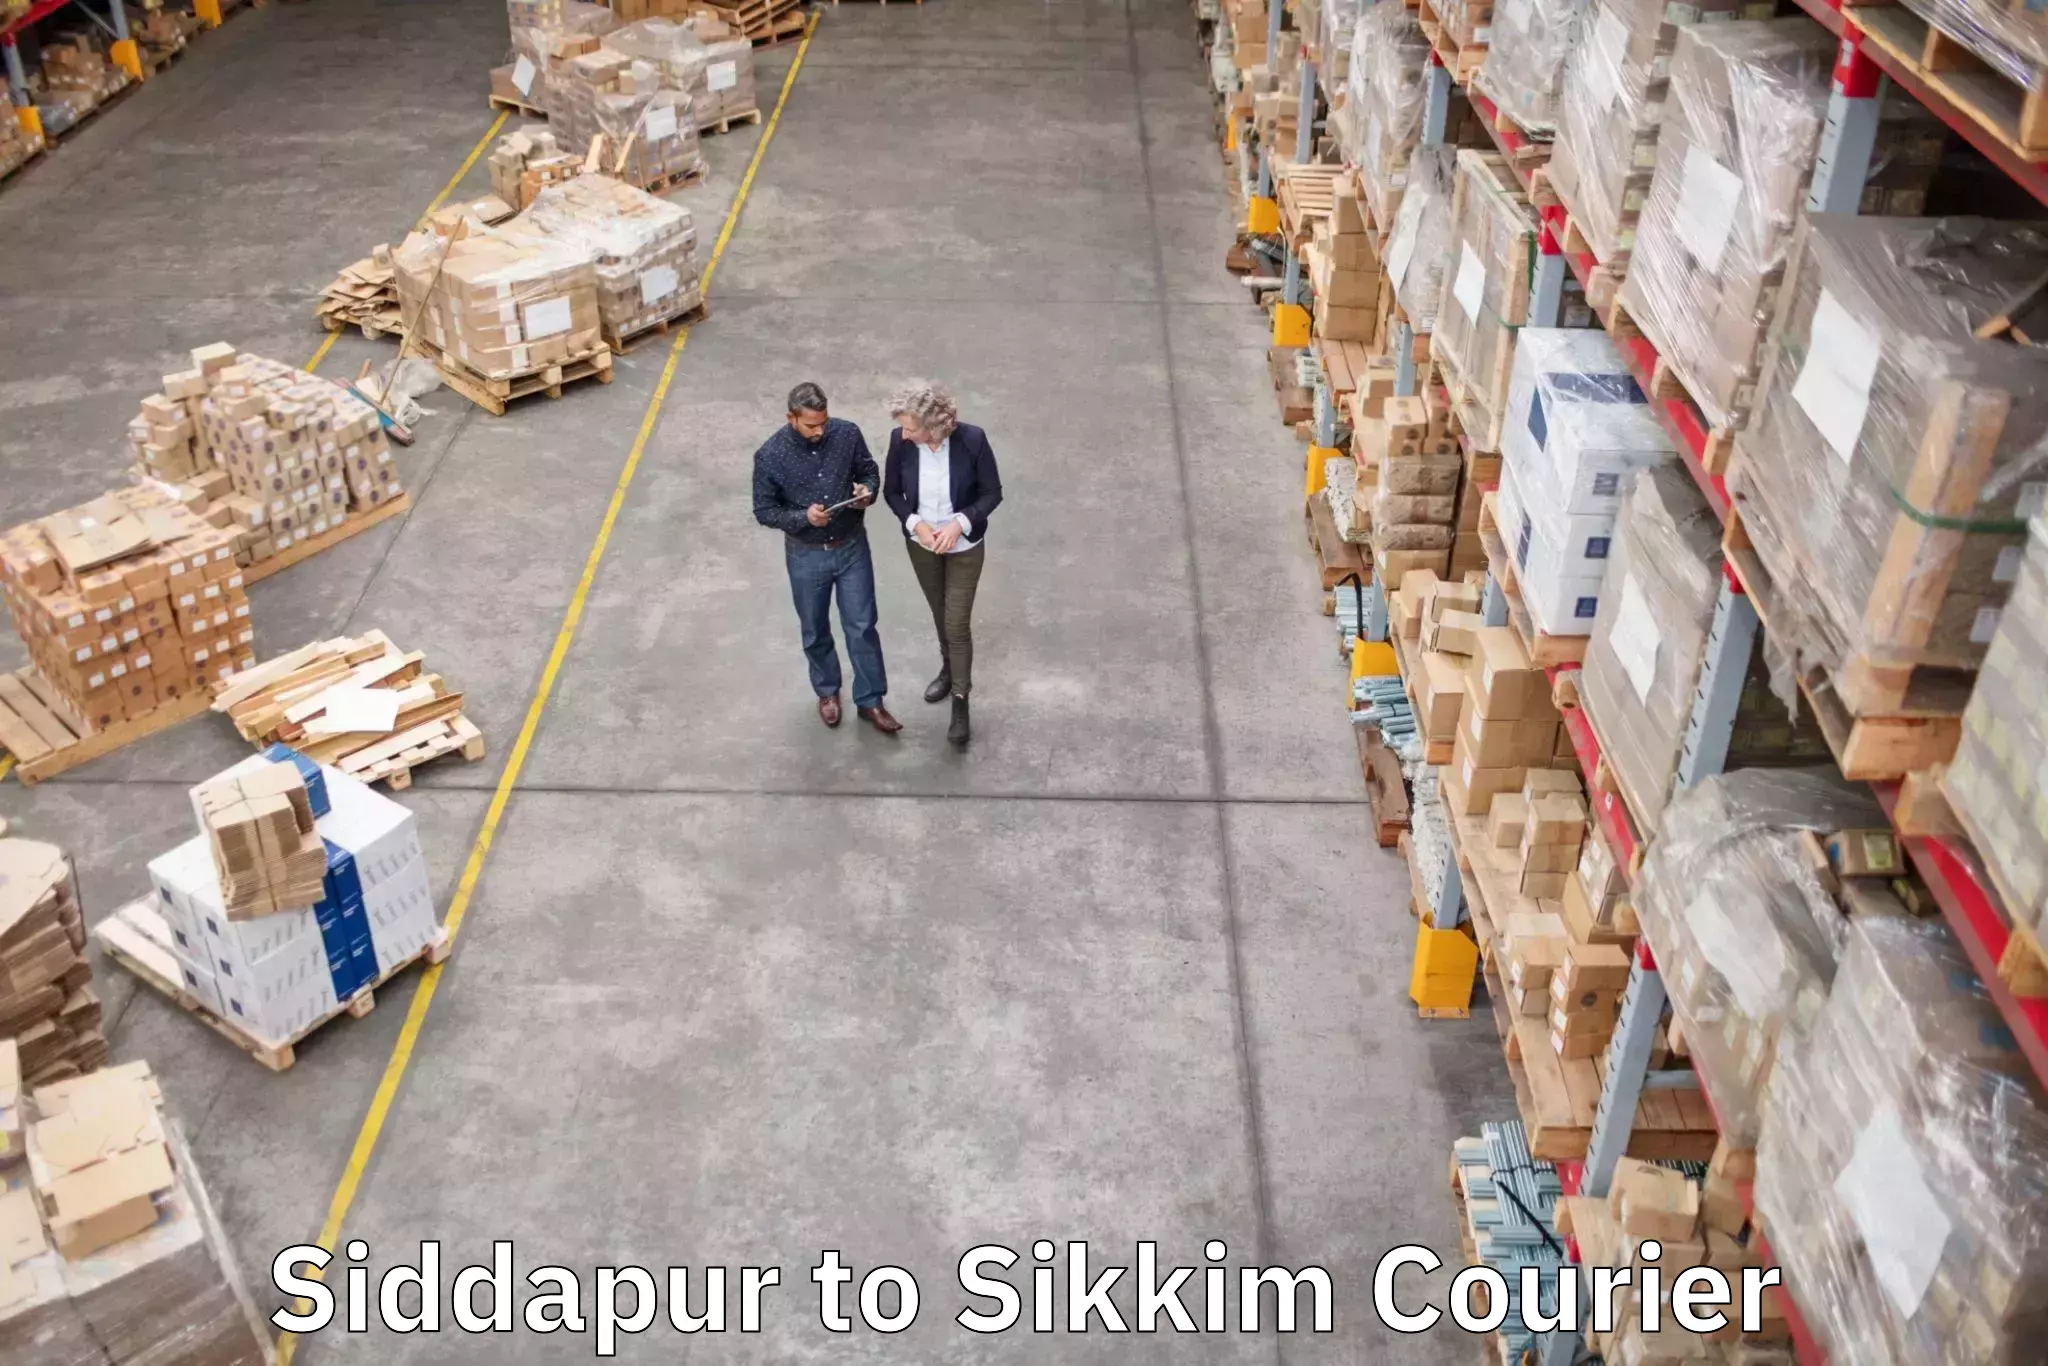 Luggage delivery app Siddapur to West Sikkim